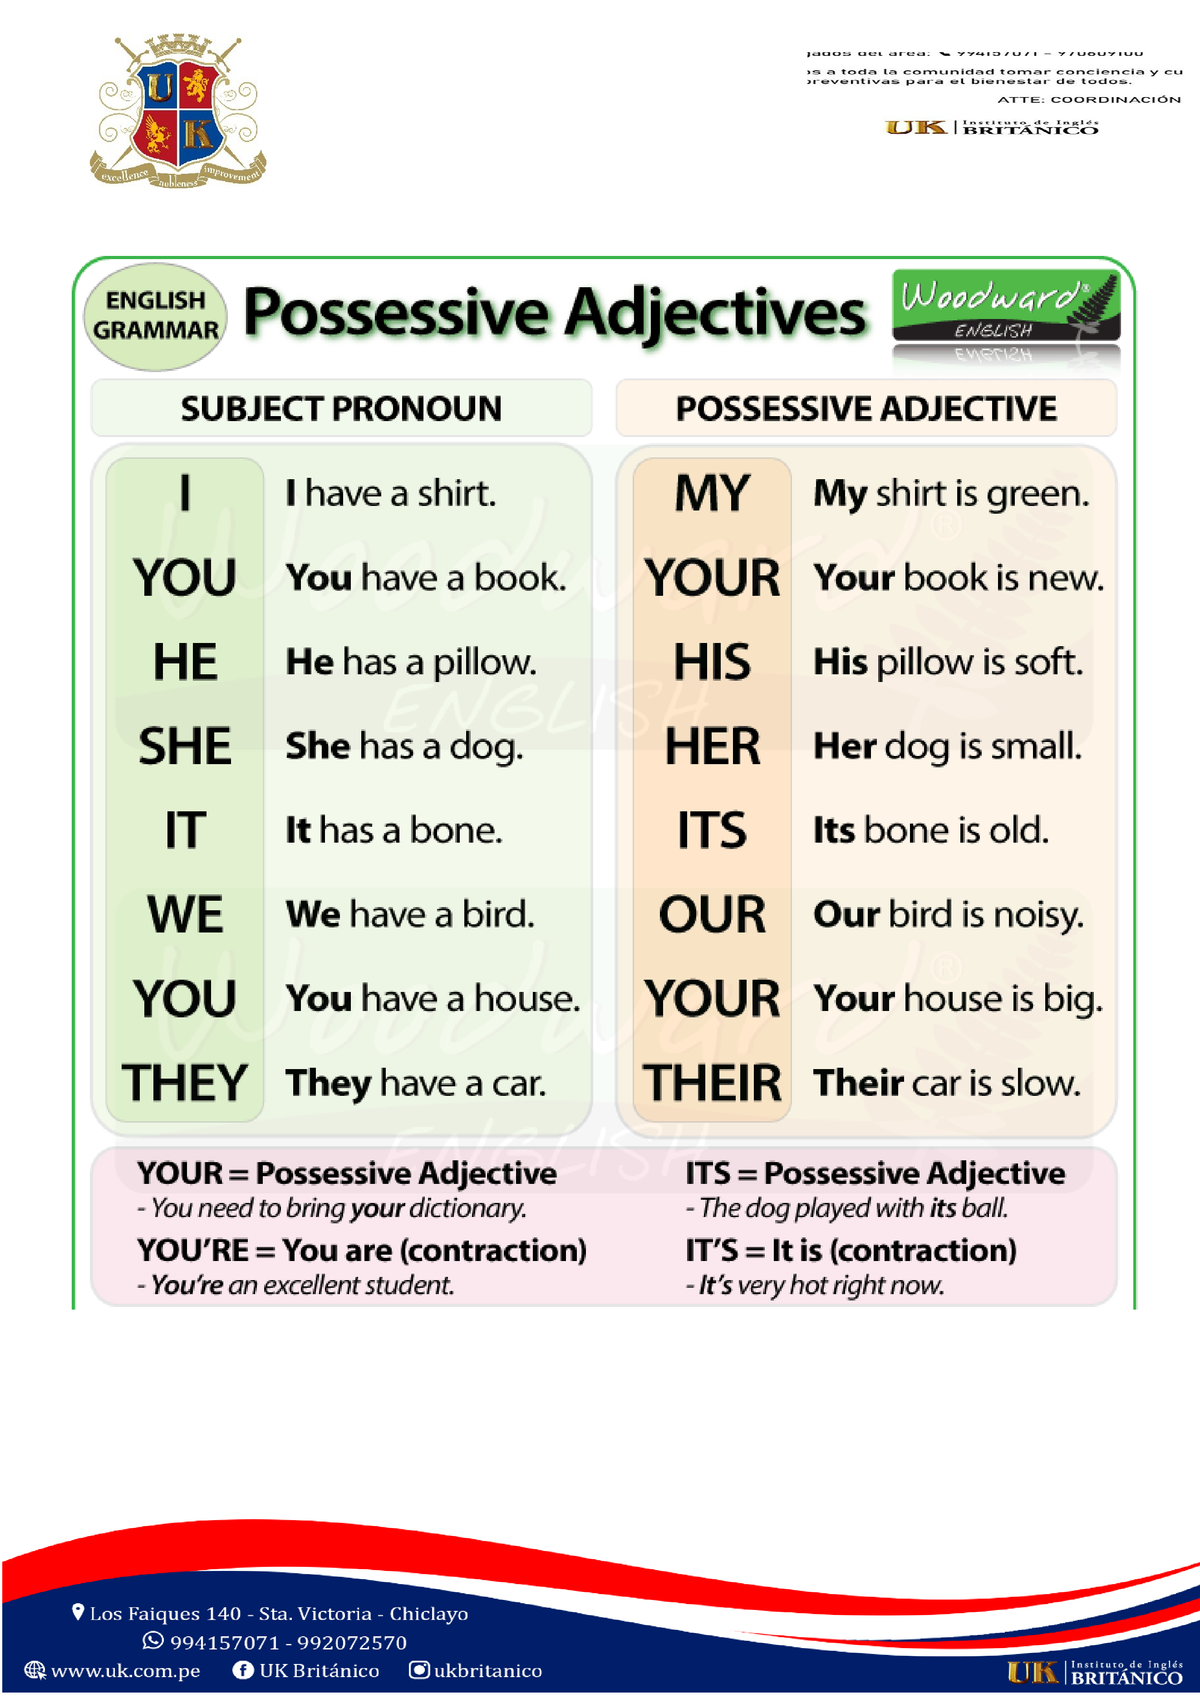 How To Highlight Adjectives In Word